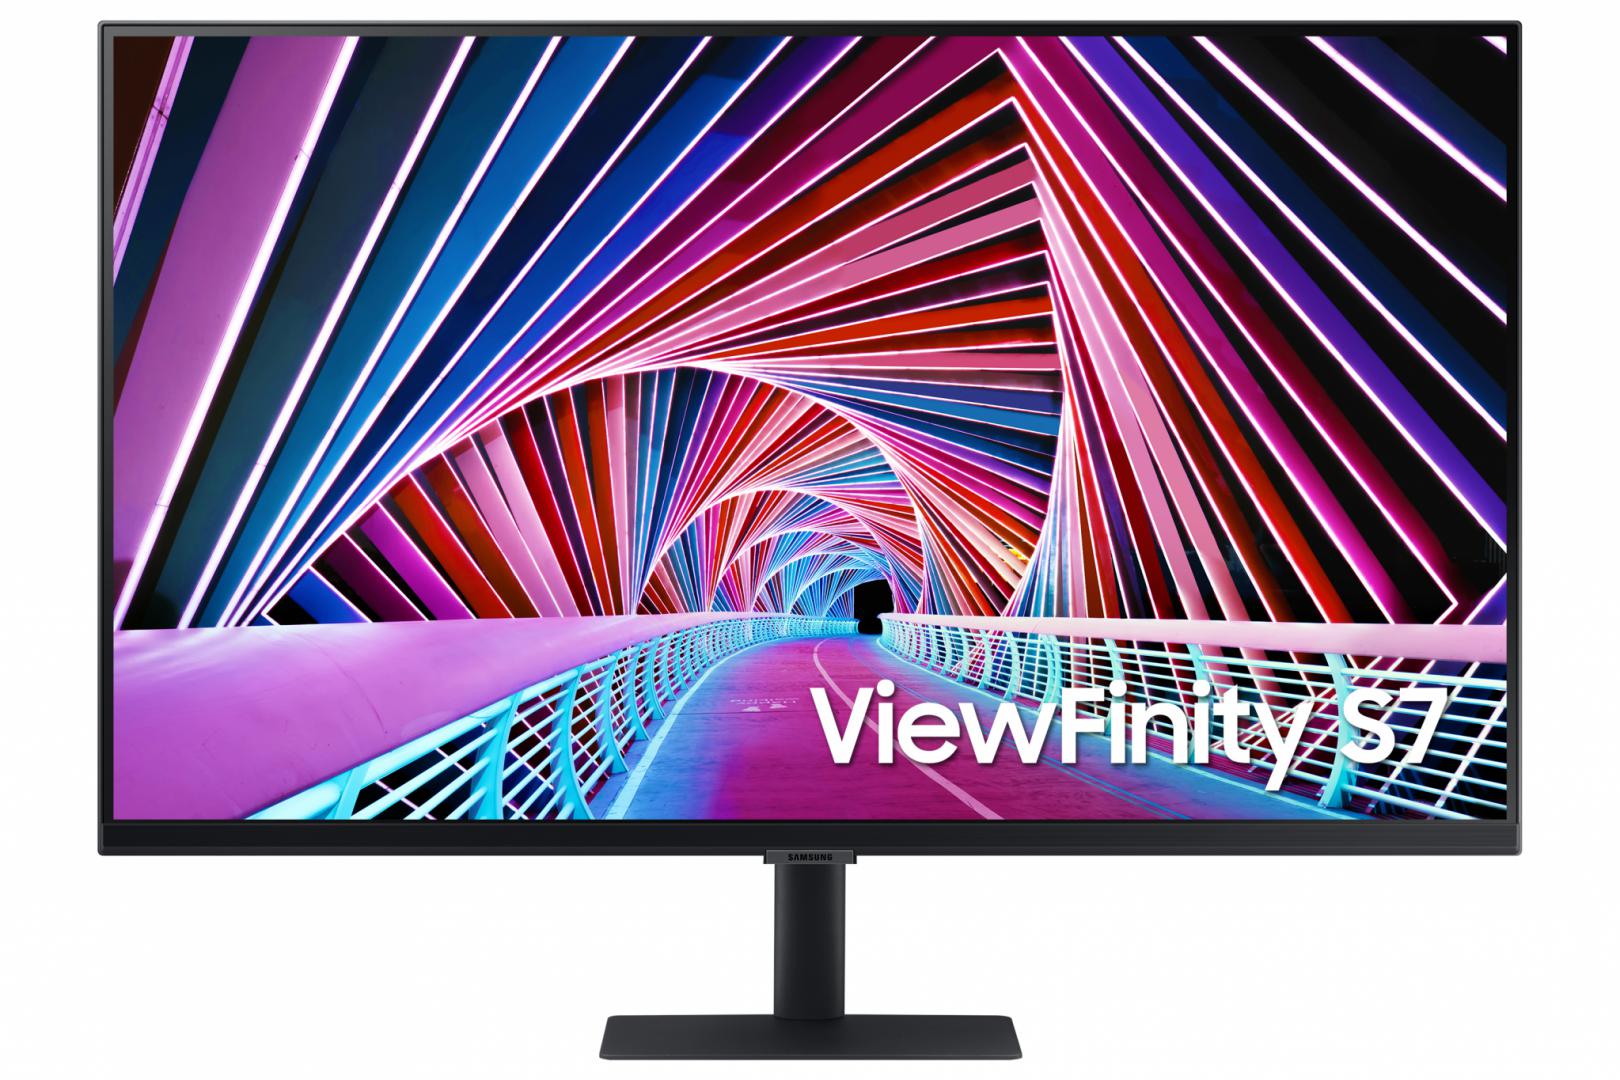 MONITOR SAMSUNG LS32A700NWPXEN 32 inch, Curvature: FLAT , Panel Type:VA, Resolution: 3,840 x 2,160, Aspect Ratio: 16:9, Refresh Rate:60Hz ,Response time GtG: 5 ms, Brightness: 300 cd/m², Contrast (static): 2500: 1, Contrast (dynamic): Mega DCR, Viewing angle: 178°/ 178°, Colours:1B, Adjustability